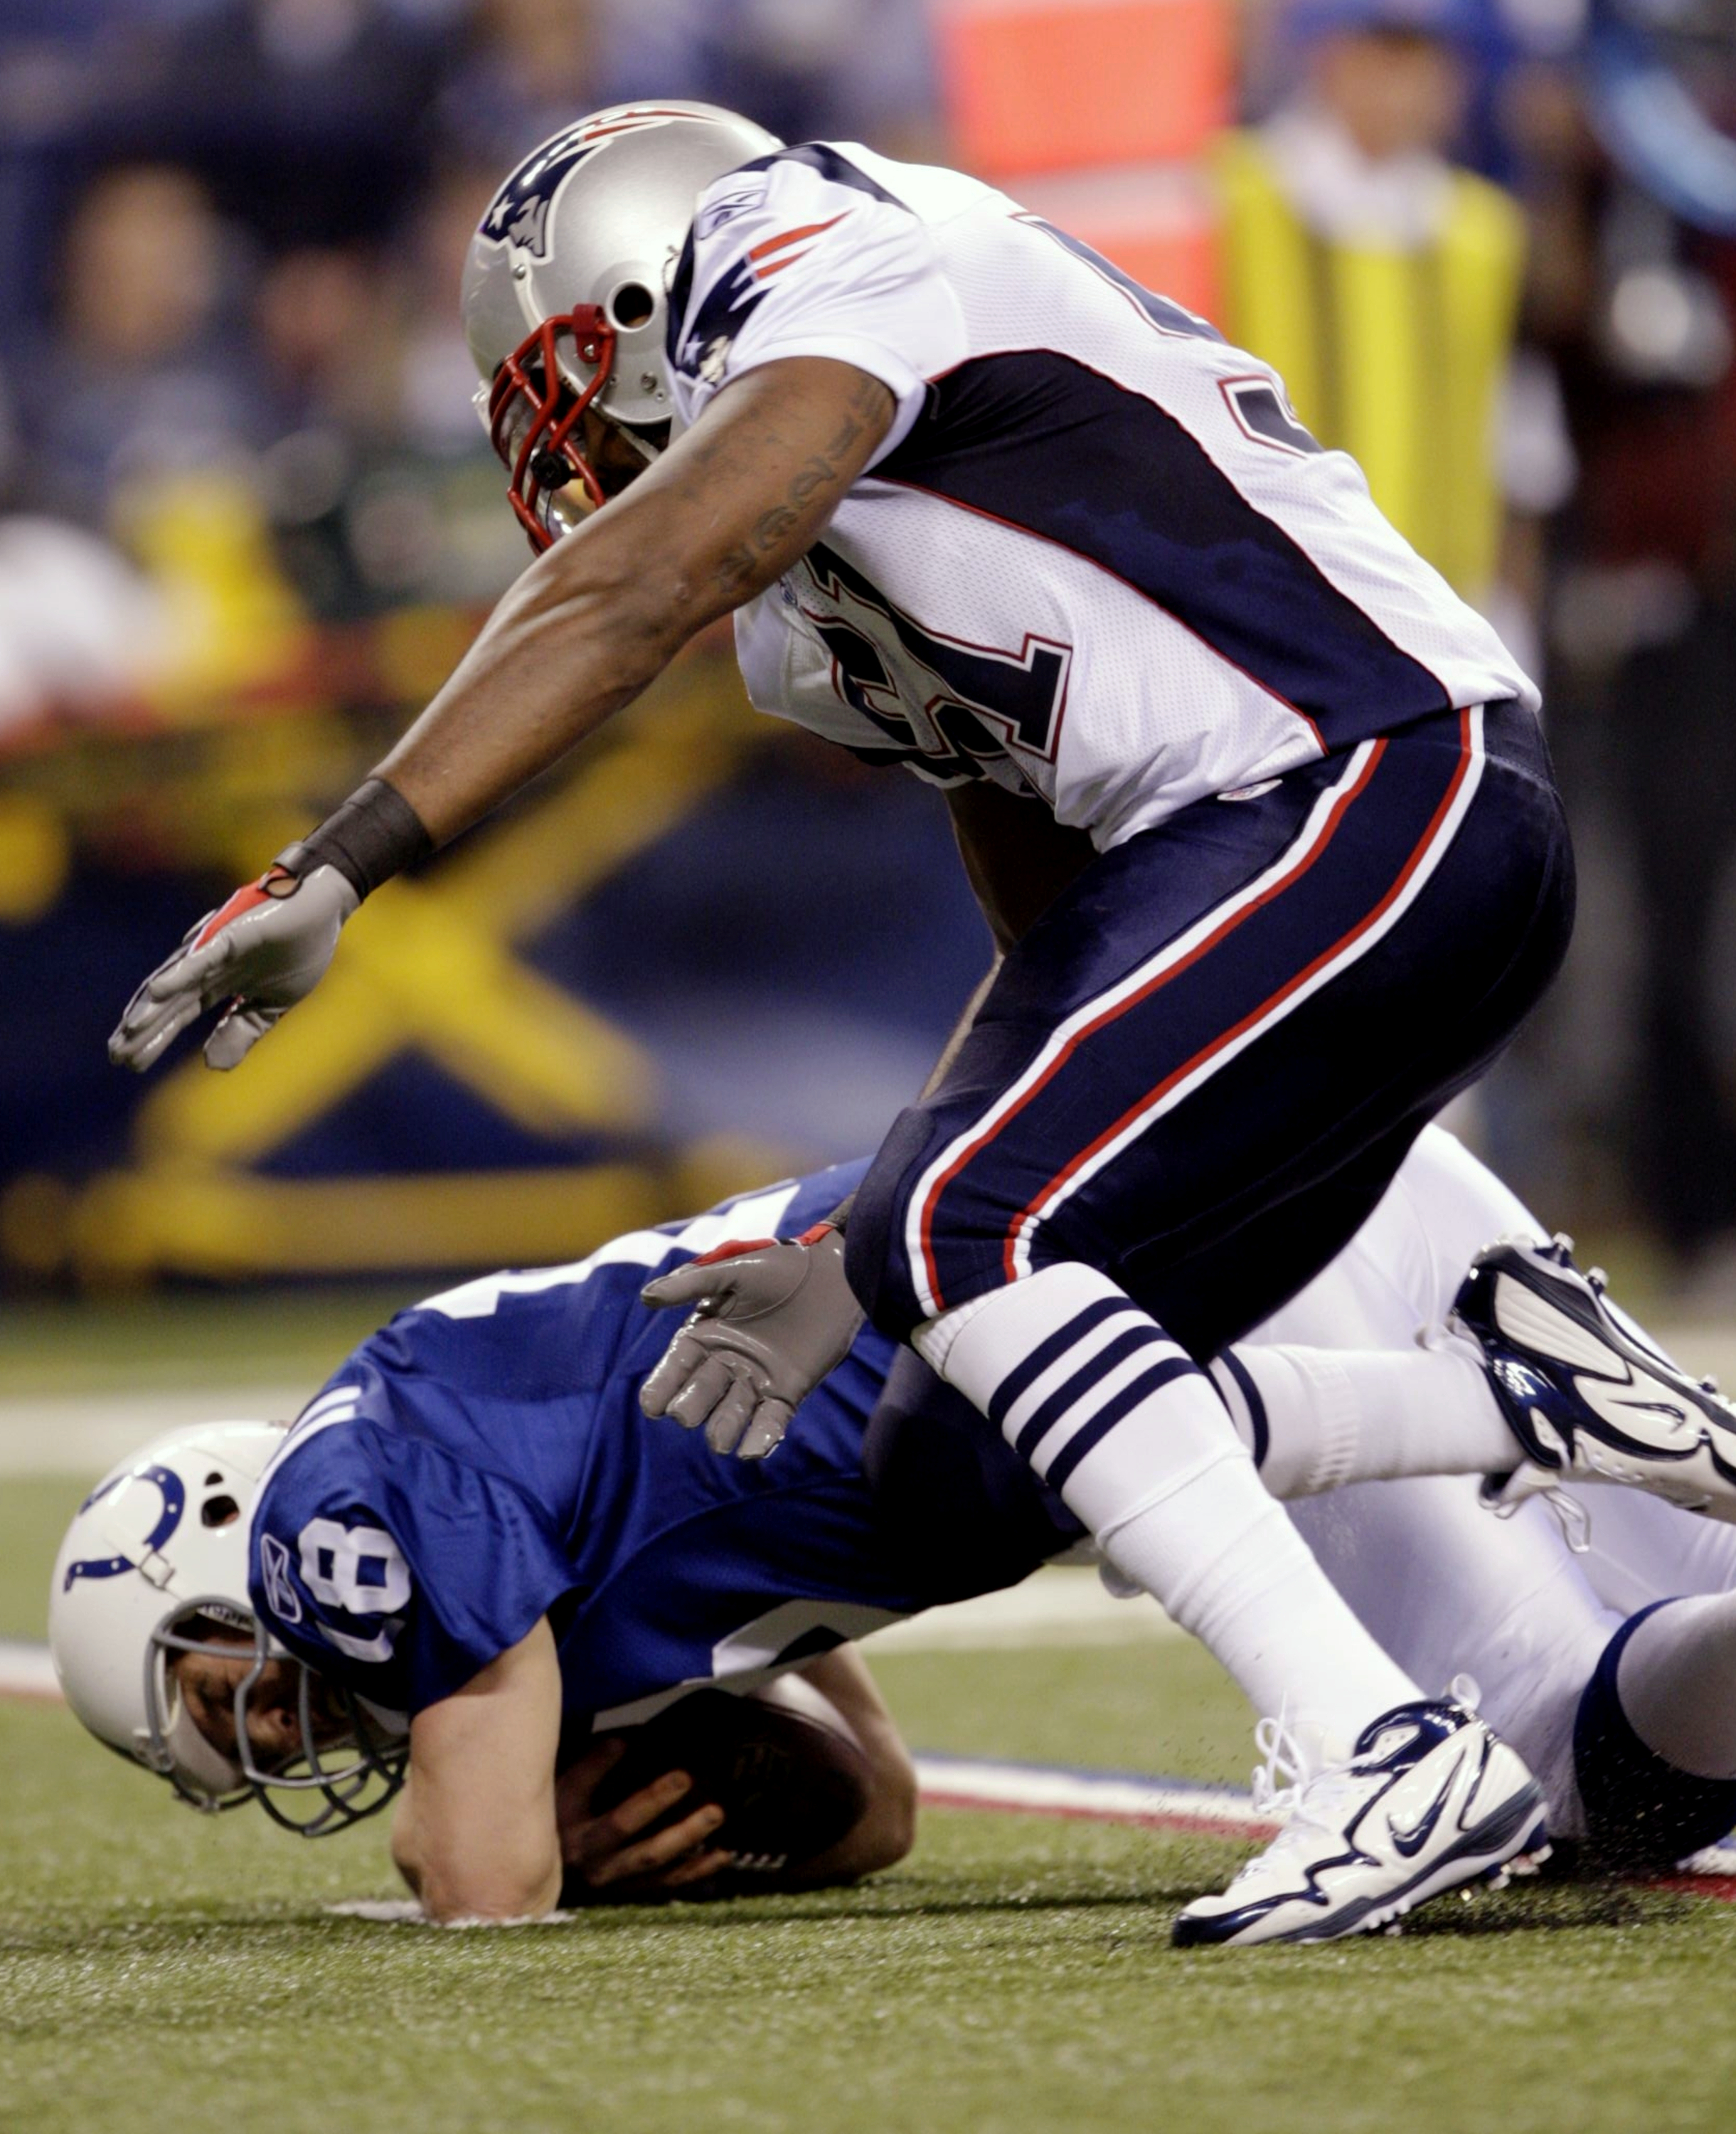 INDIANAPOLIS - NOVEMBER 15: Quarterback Peyton Manning #18 of the Indianapolis Colts is sacked by Jerod Mayo #51 of the New England Patriots during the second quarter of the game at Lucas Oil Stadium on November 15, 2009 in Indianapolis, Indiana. (Photo b